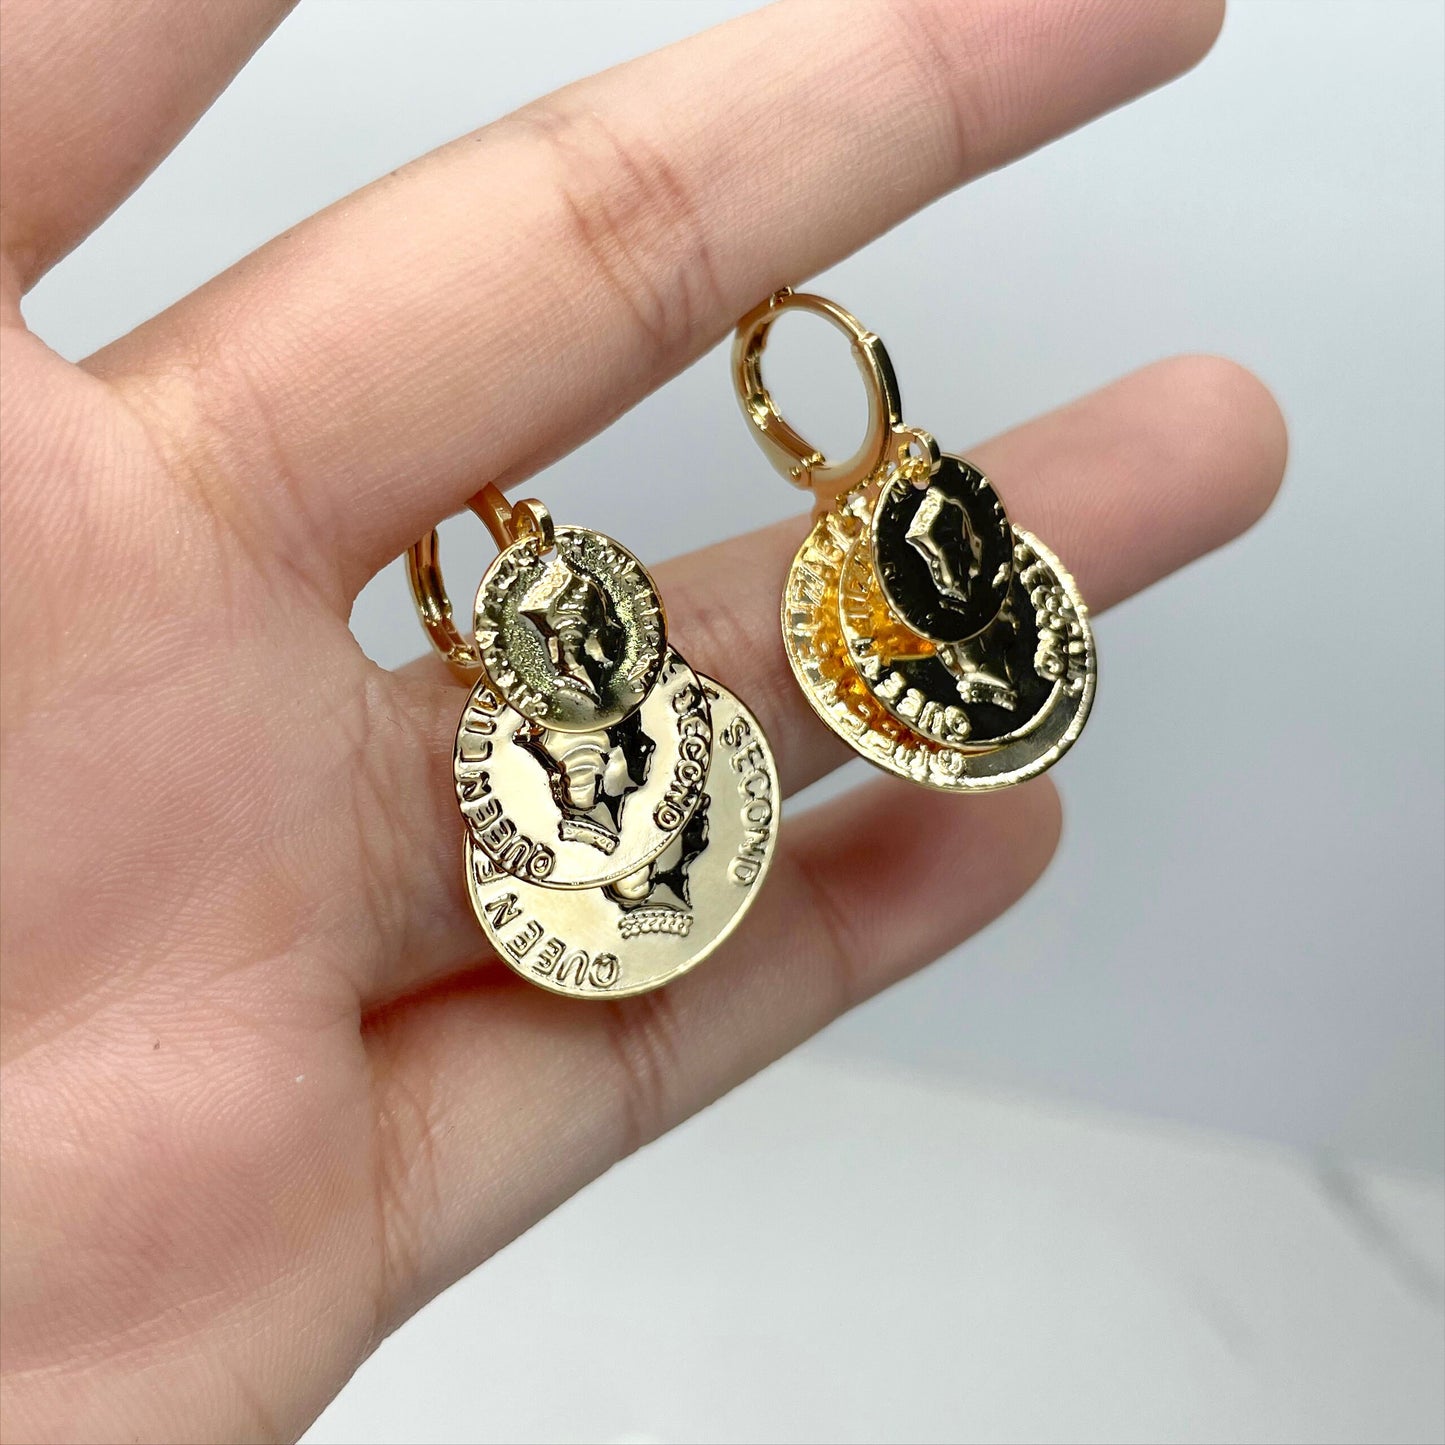 18k Gold Filled Three Layers Coins, The Second Queen Elizabeth, Woman Crown, Dangle Earrings, Wholesale Jewelry Making Supplies